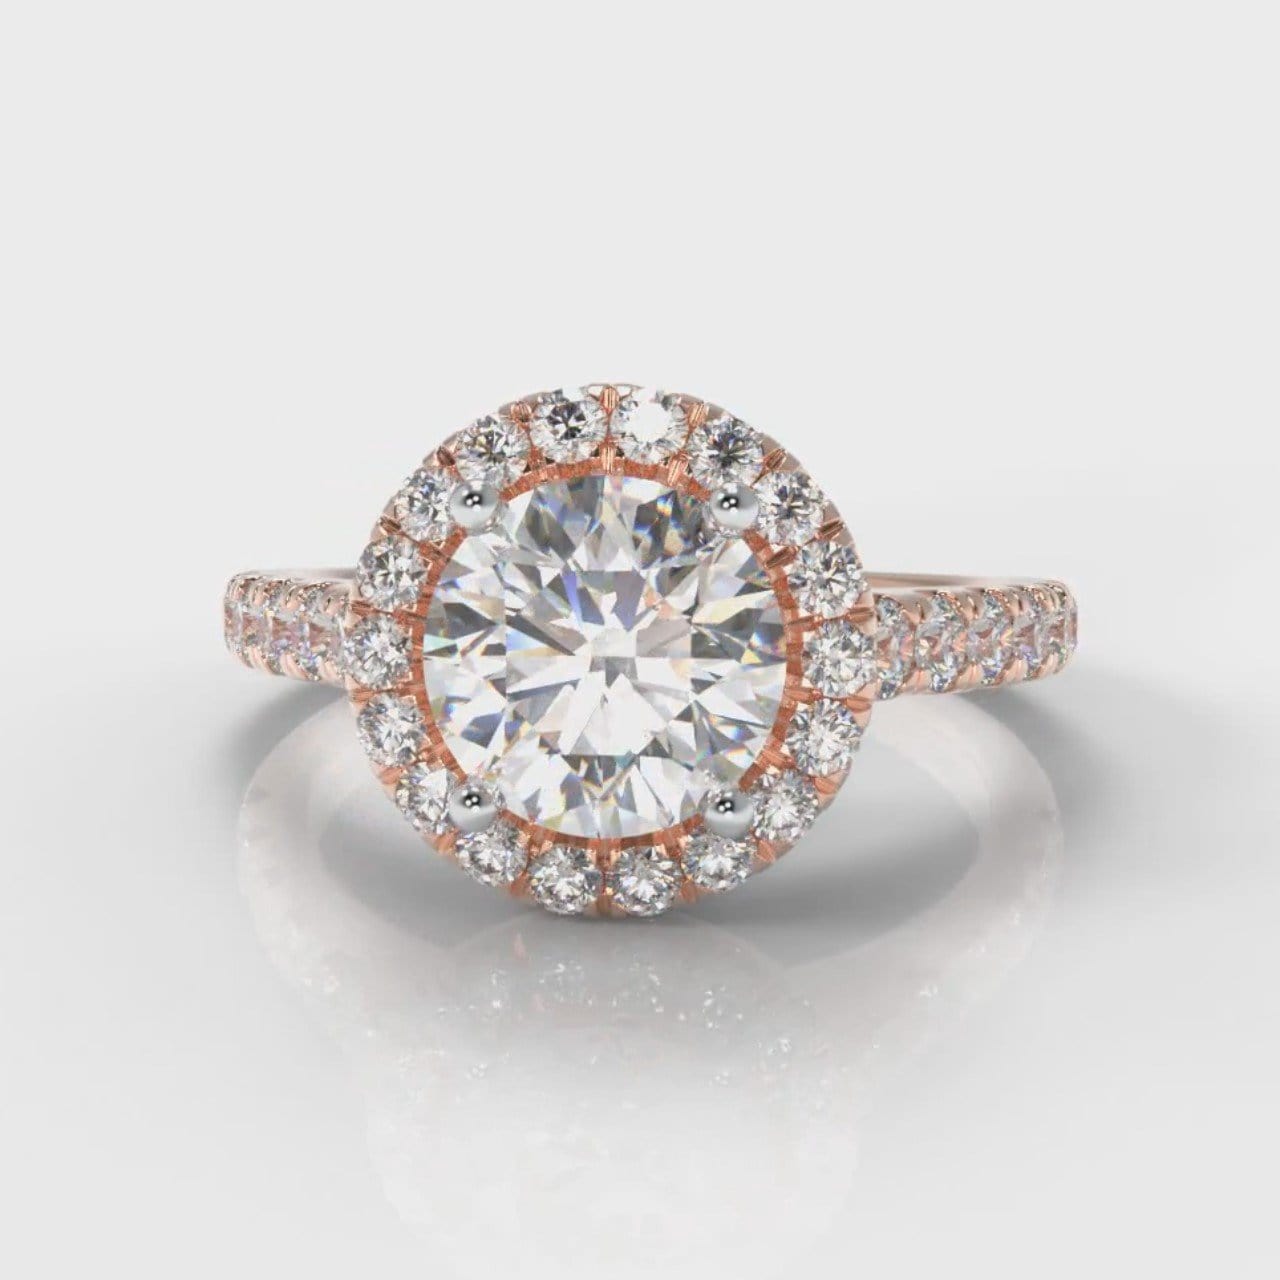 Micropavé Round Brilliant Cut Diamond Halo Engagement Ring - Rose Gold